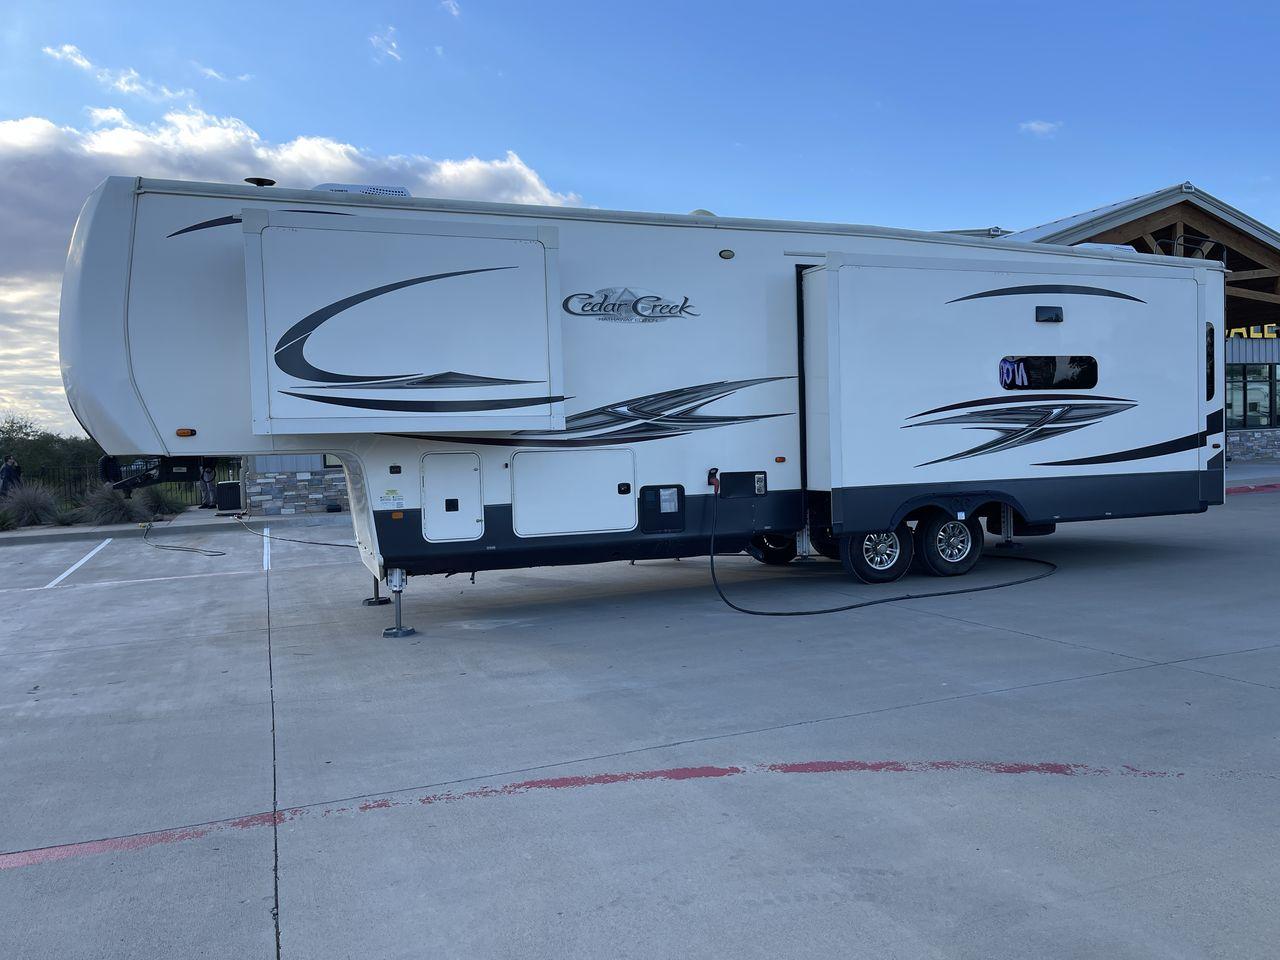 2020 TAN FOREST RIVER CEDAR CREEK HATHAWAY (4X4FCRM28LS) , Length: 38.83 ft. | Dry Weight: 13,134 lbs. | Gross Weight: 16,525 lbs. | Slides: 3 transmission, located at 4319 N Main Street, Cleburne, TX, 76033, (817) 221-0660, 32.435829, -97.384178 - This 2020 Cedar Creek Hathaway 36CK2 fifth wheel has a length of 38.83 ft, a width of 8 ft, and a height of 13.42 ft. This fifth wheel has a dry weight of 13,134 lbs and a payload capacity of 3,391. The GVWR is 16,525 lbs and has a hitch weight of 2,525 lbs. The Cedar Creek has a true gel coat finis - Photo #24